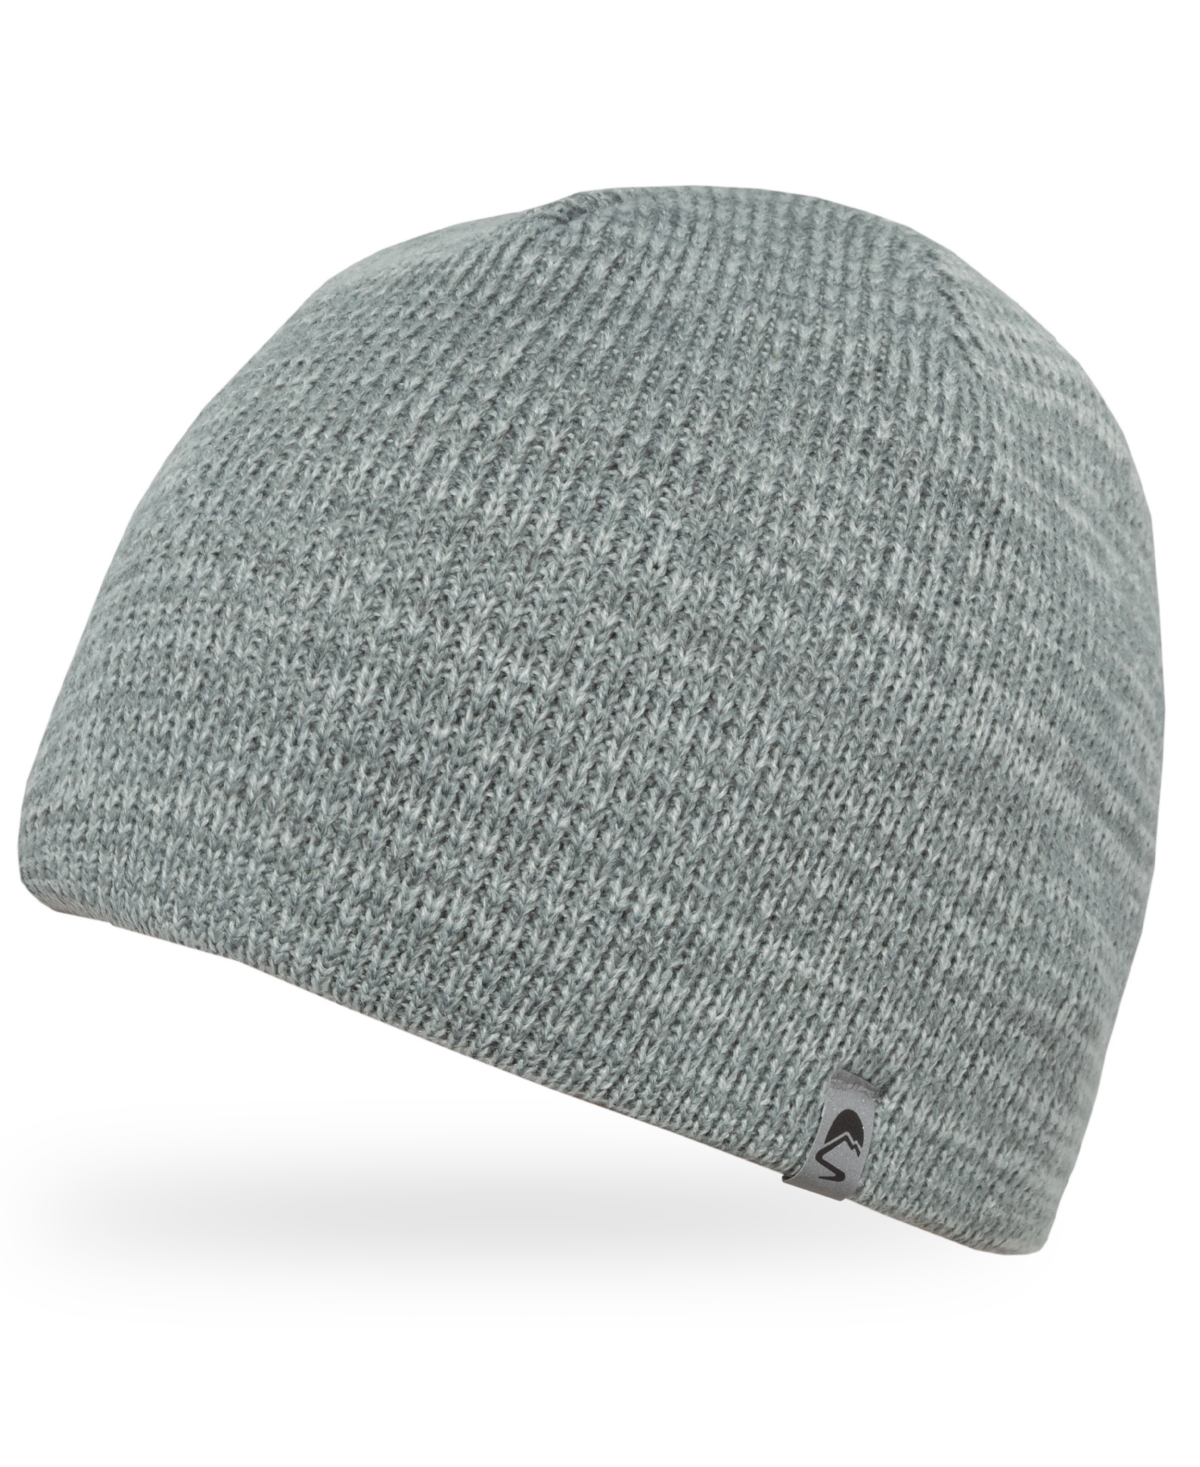 Sunday Afternoons Nightfall Reflective Beanie In Overcast,quarry